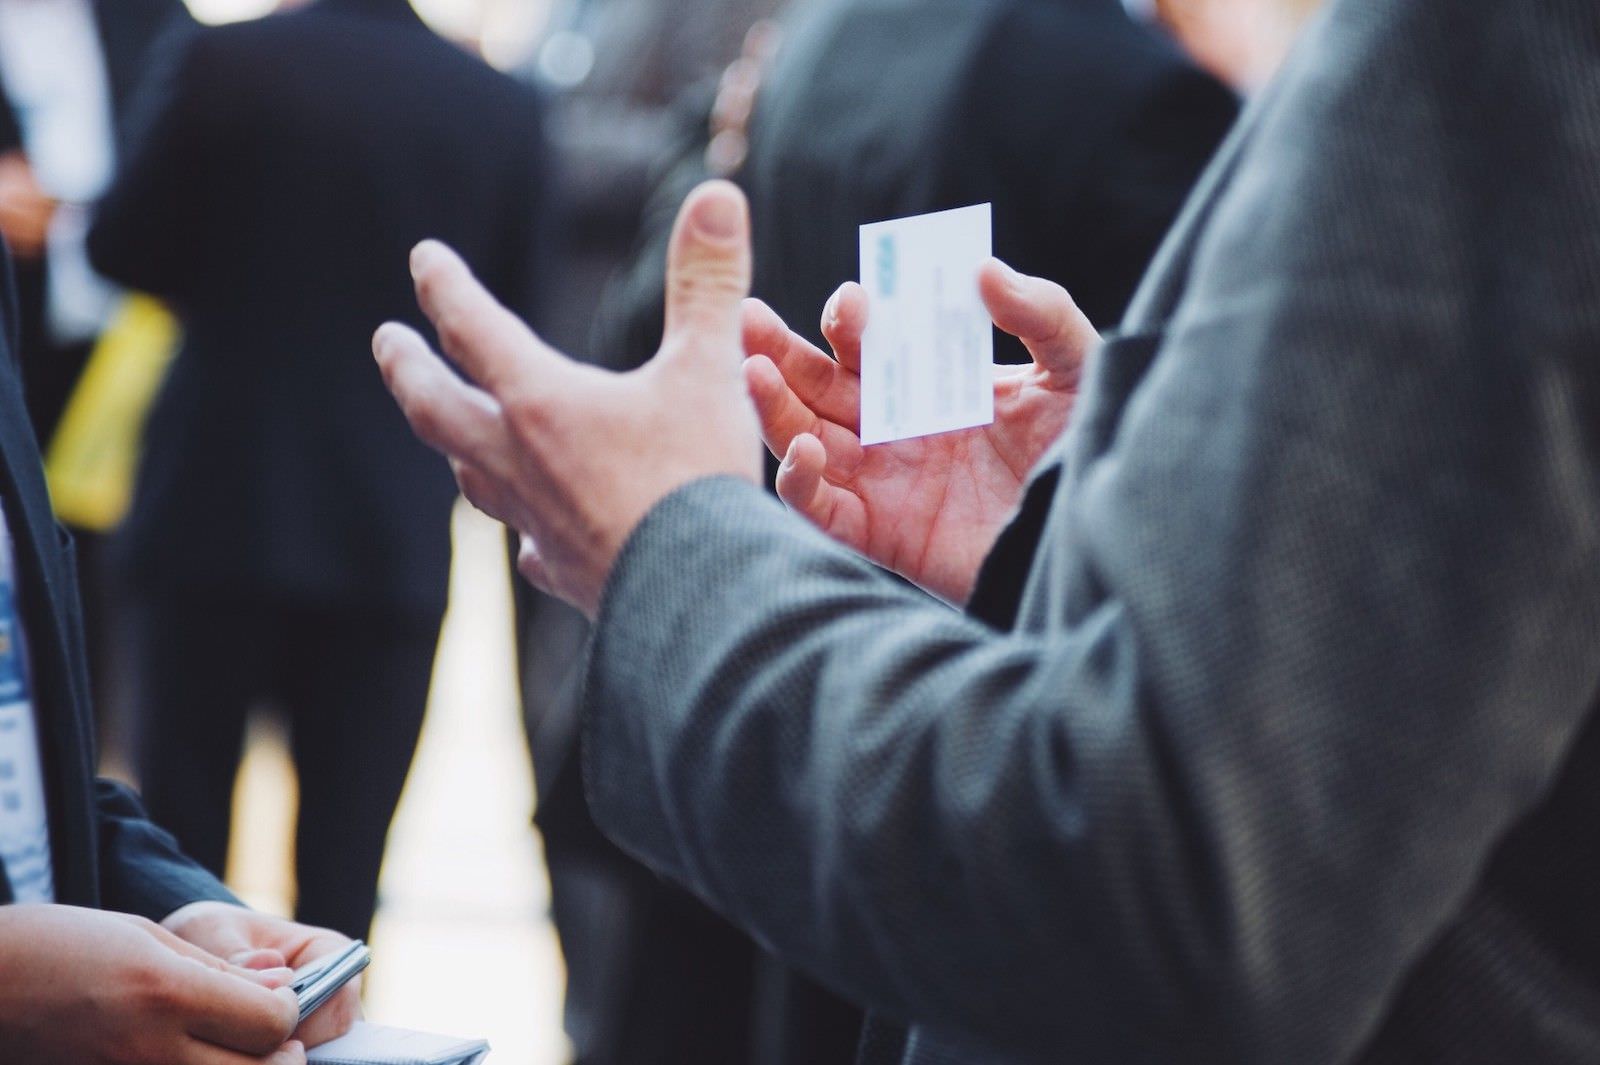 People exchanging business cards